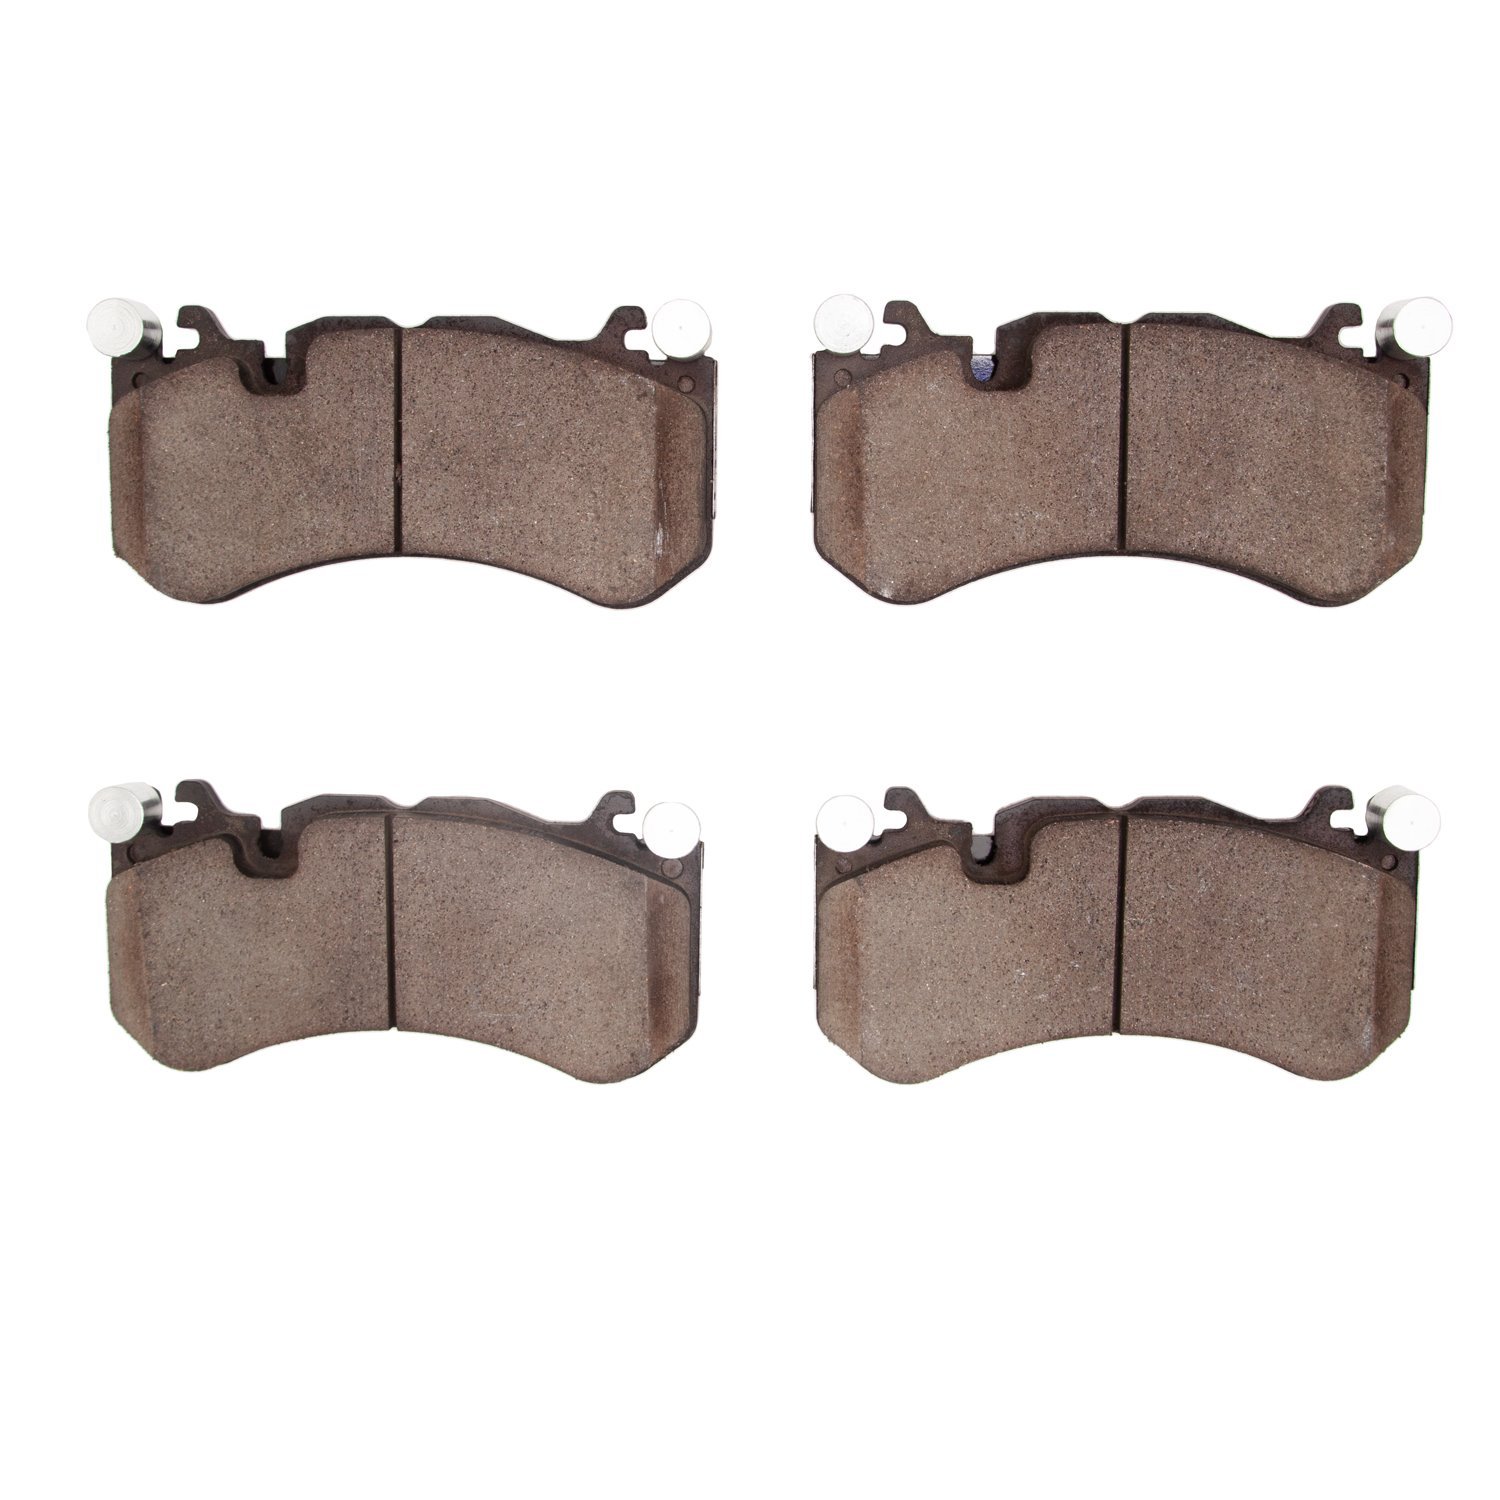 1000-1291-00 Track/Street Low-Metallic Brake Pads Kit, Fits Select Multiple Makes/Models, Position: Front